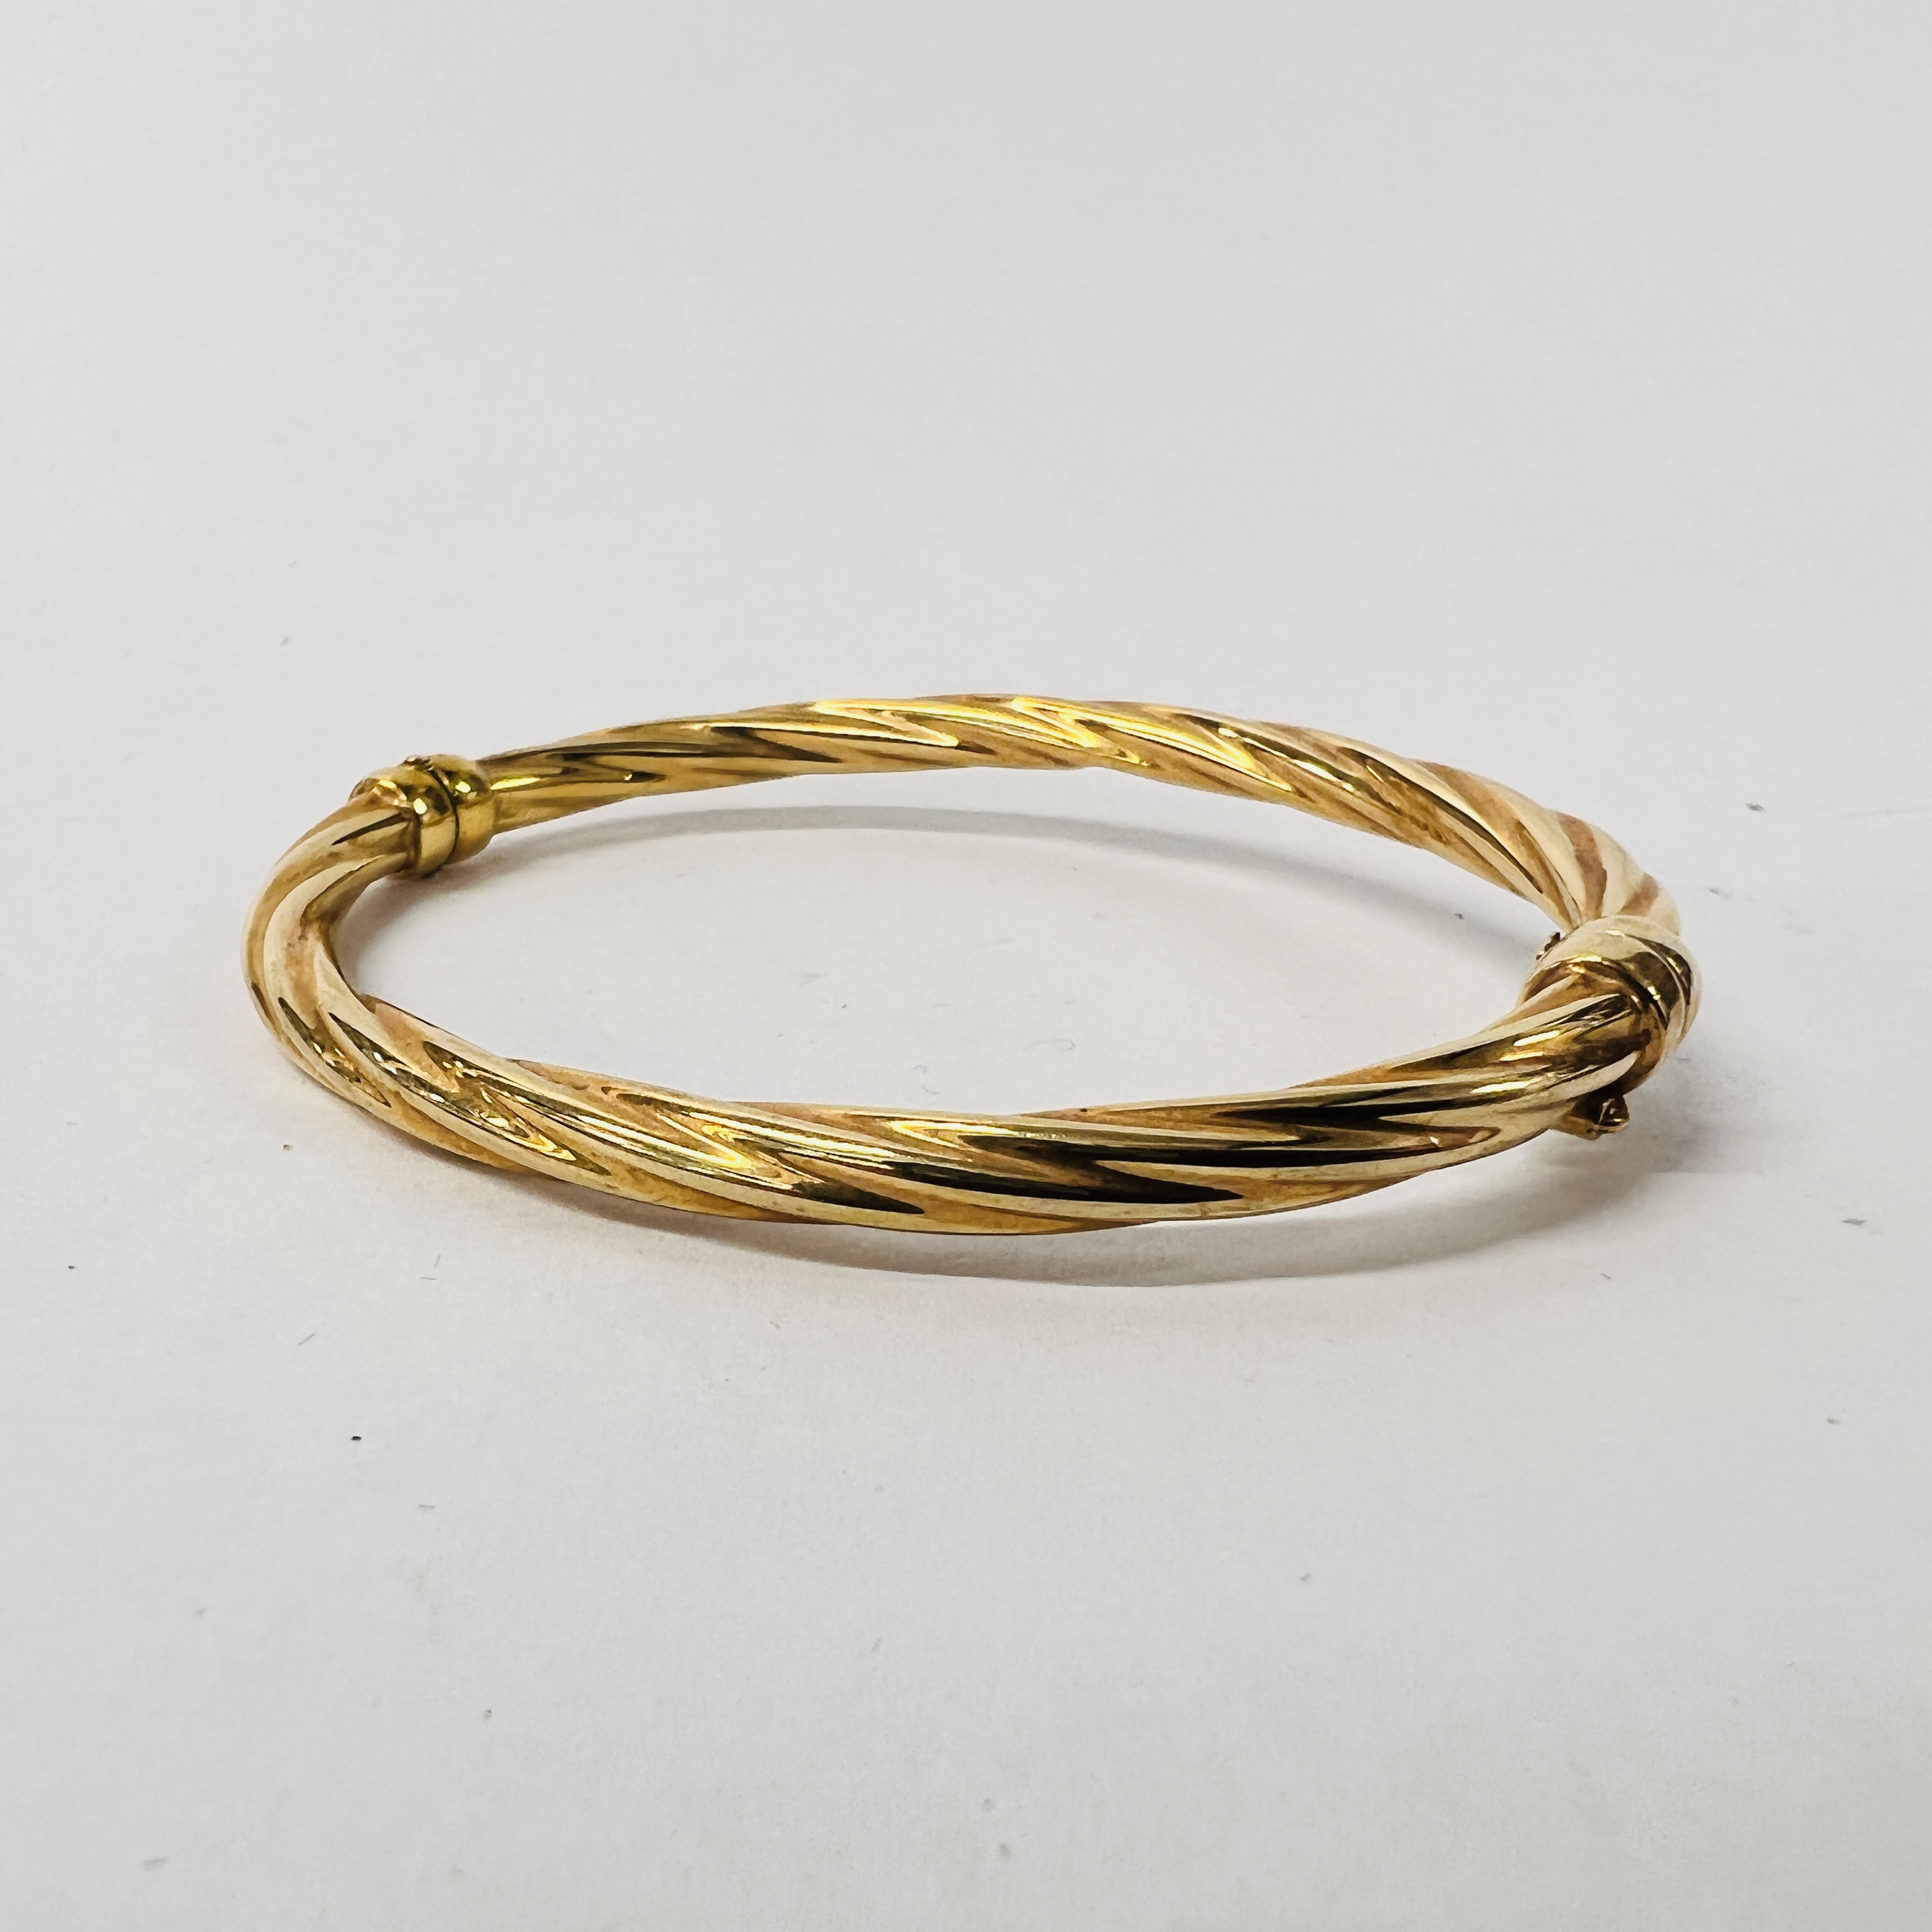 9CT GOLD BRACELET, WITH SAFETY CATCH. - Image 6 of 8